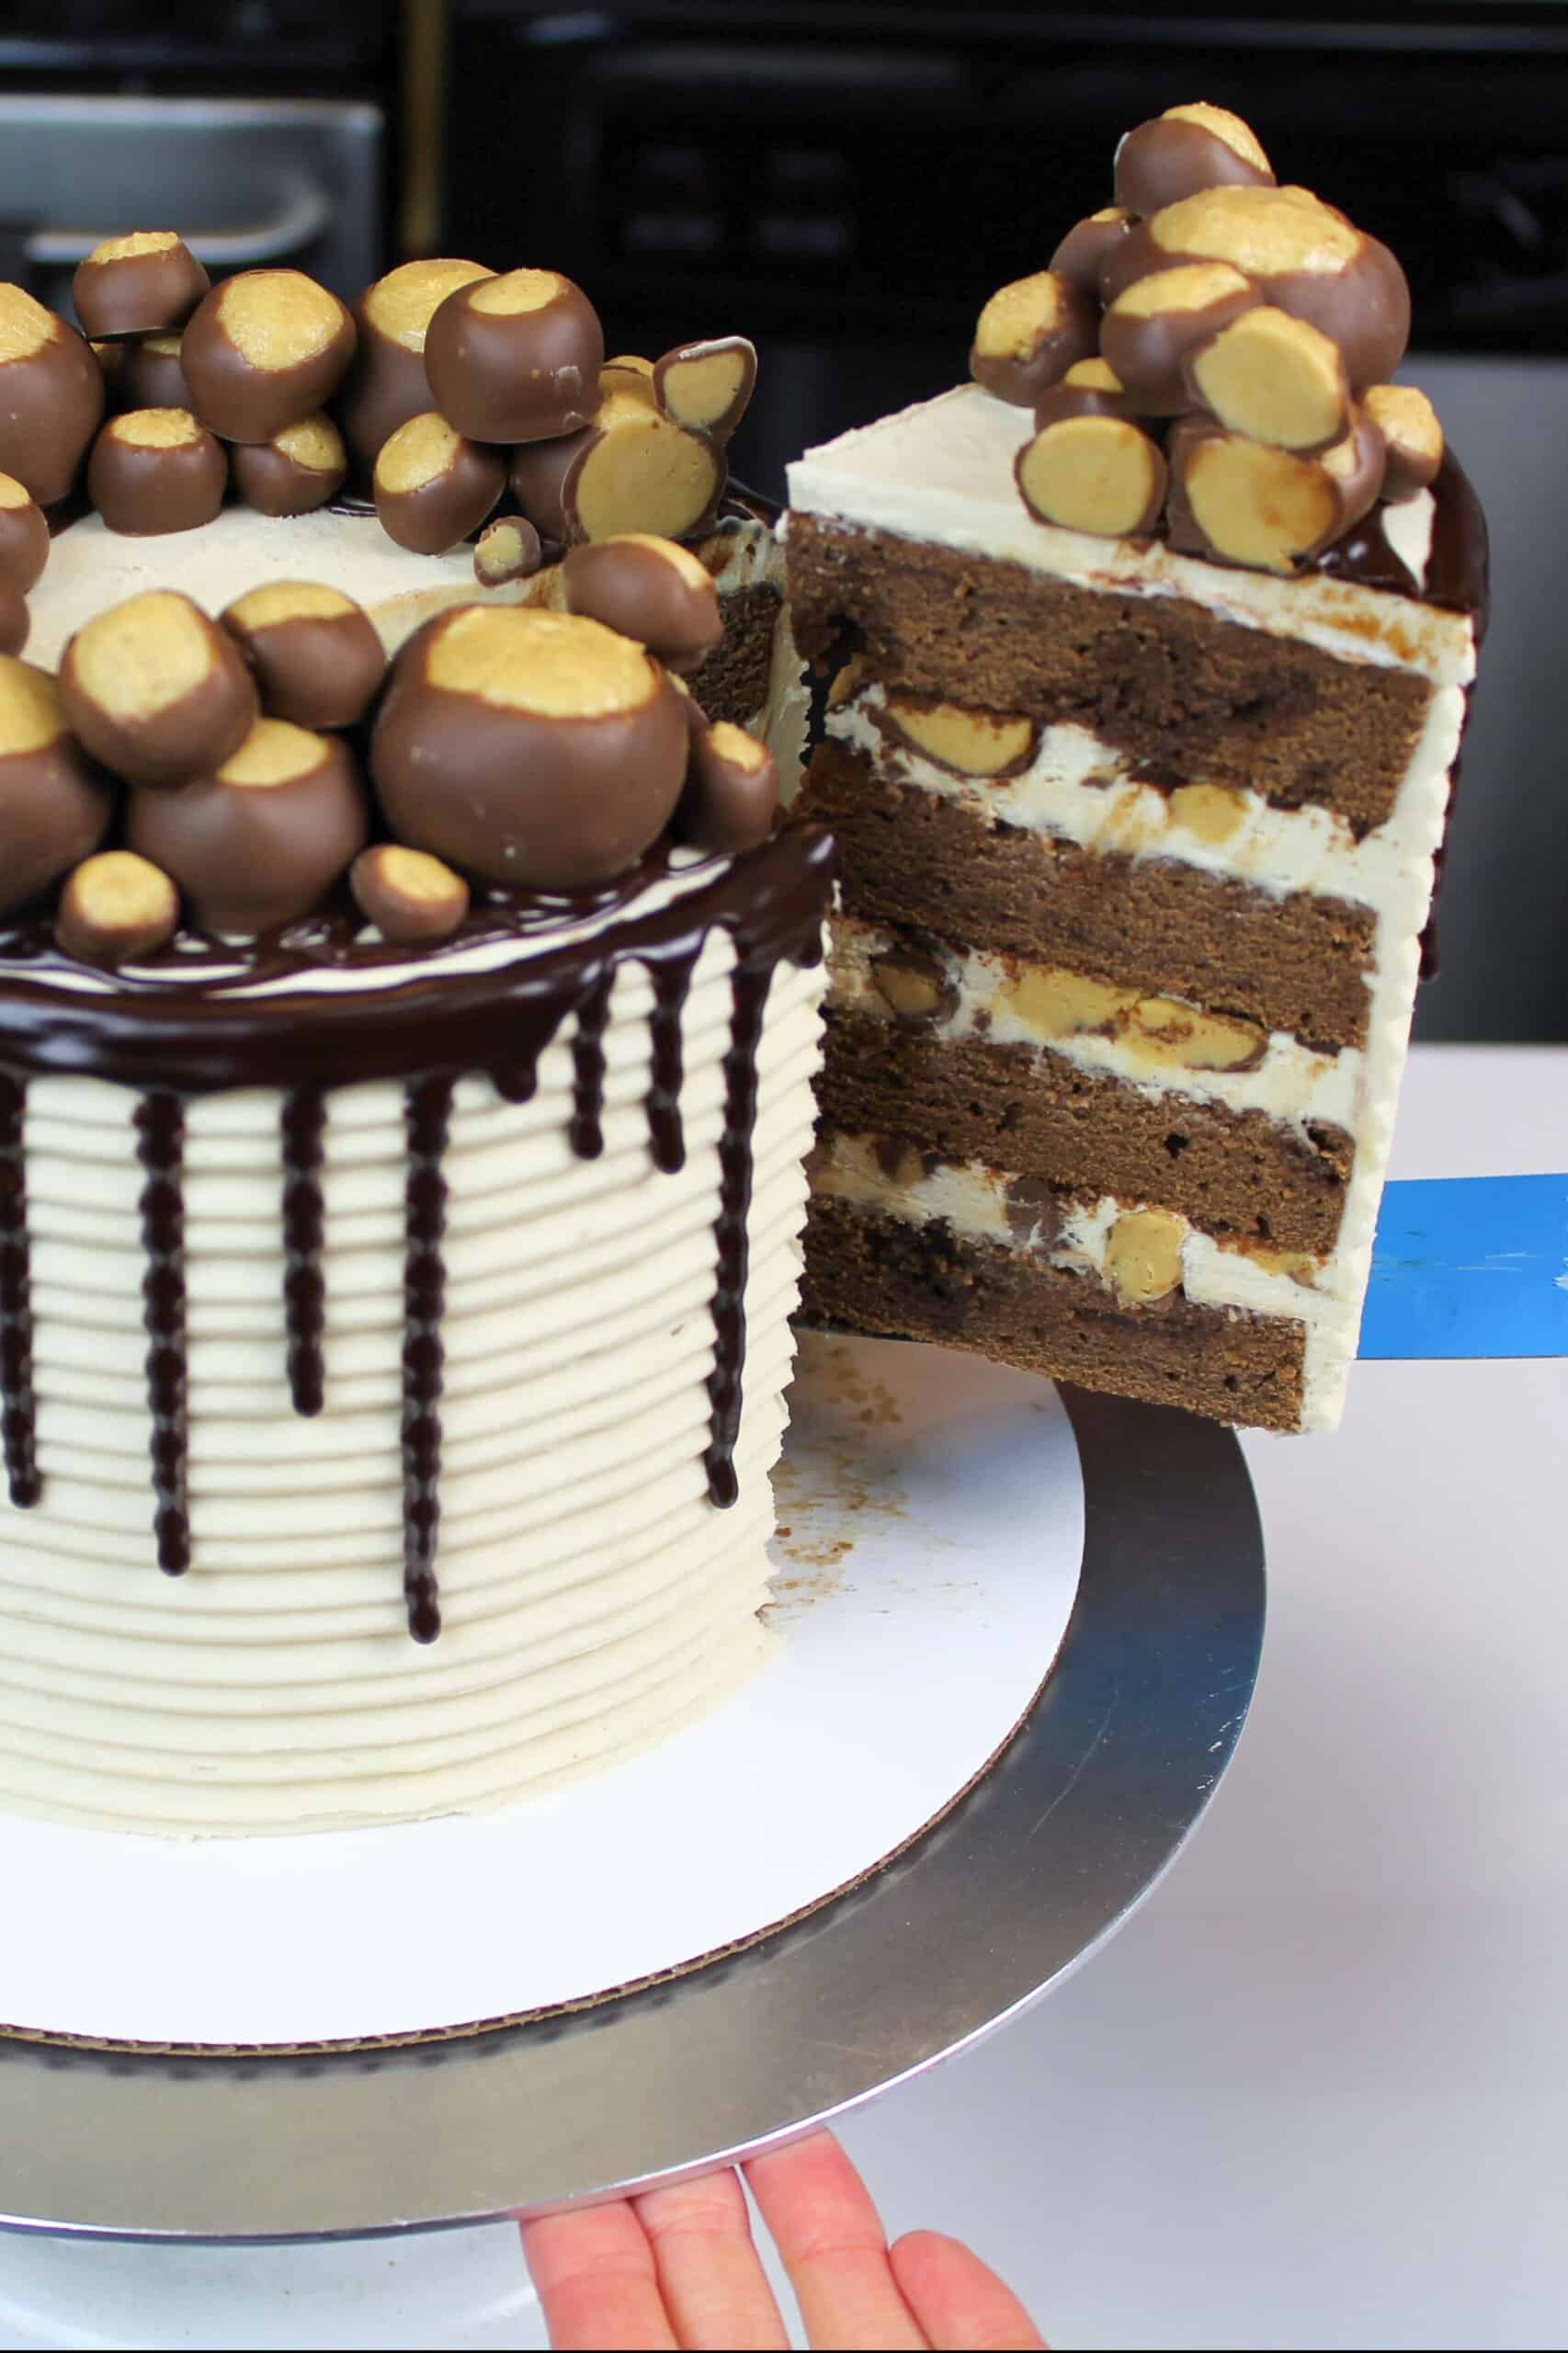 image of buckeye cake being cut into to show it's peanut butter frosting and tender chocolate cake layers